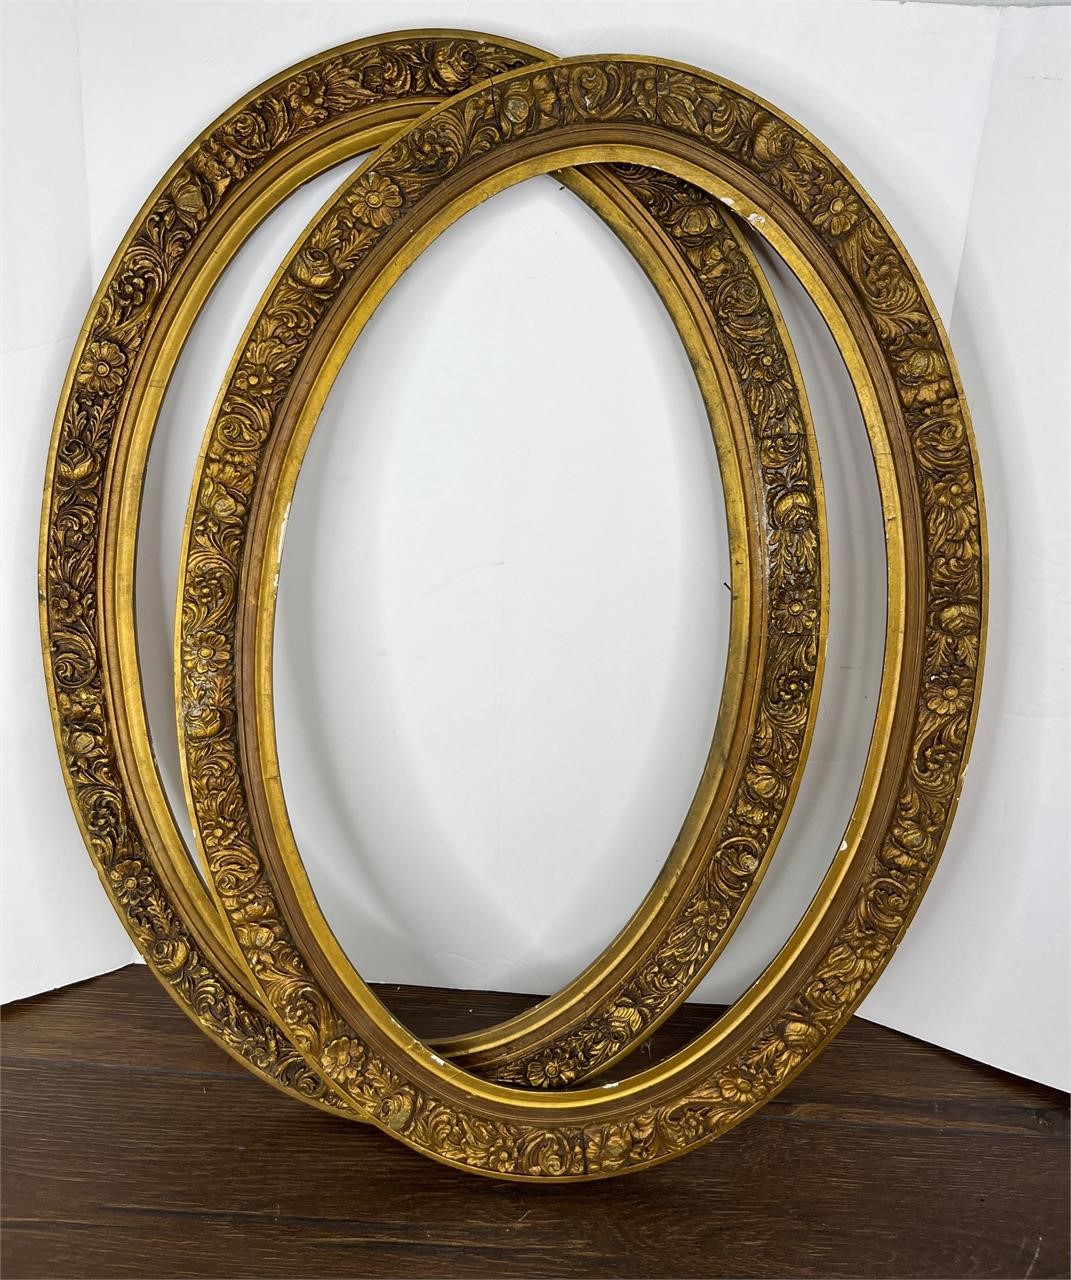 2 Oval Antique Picture Frames